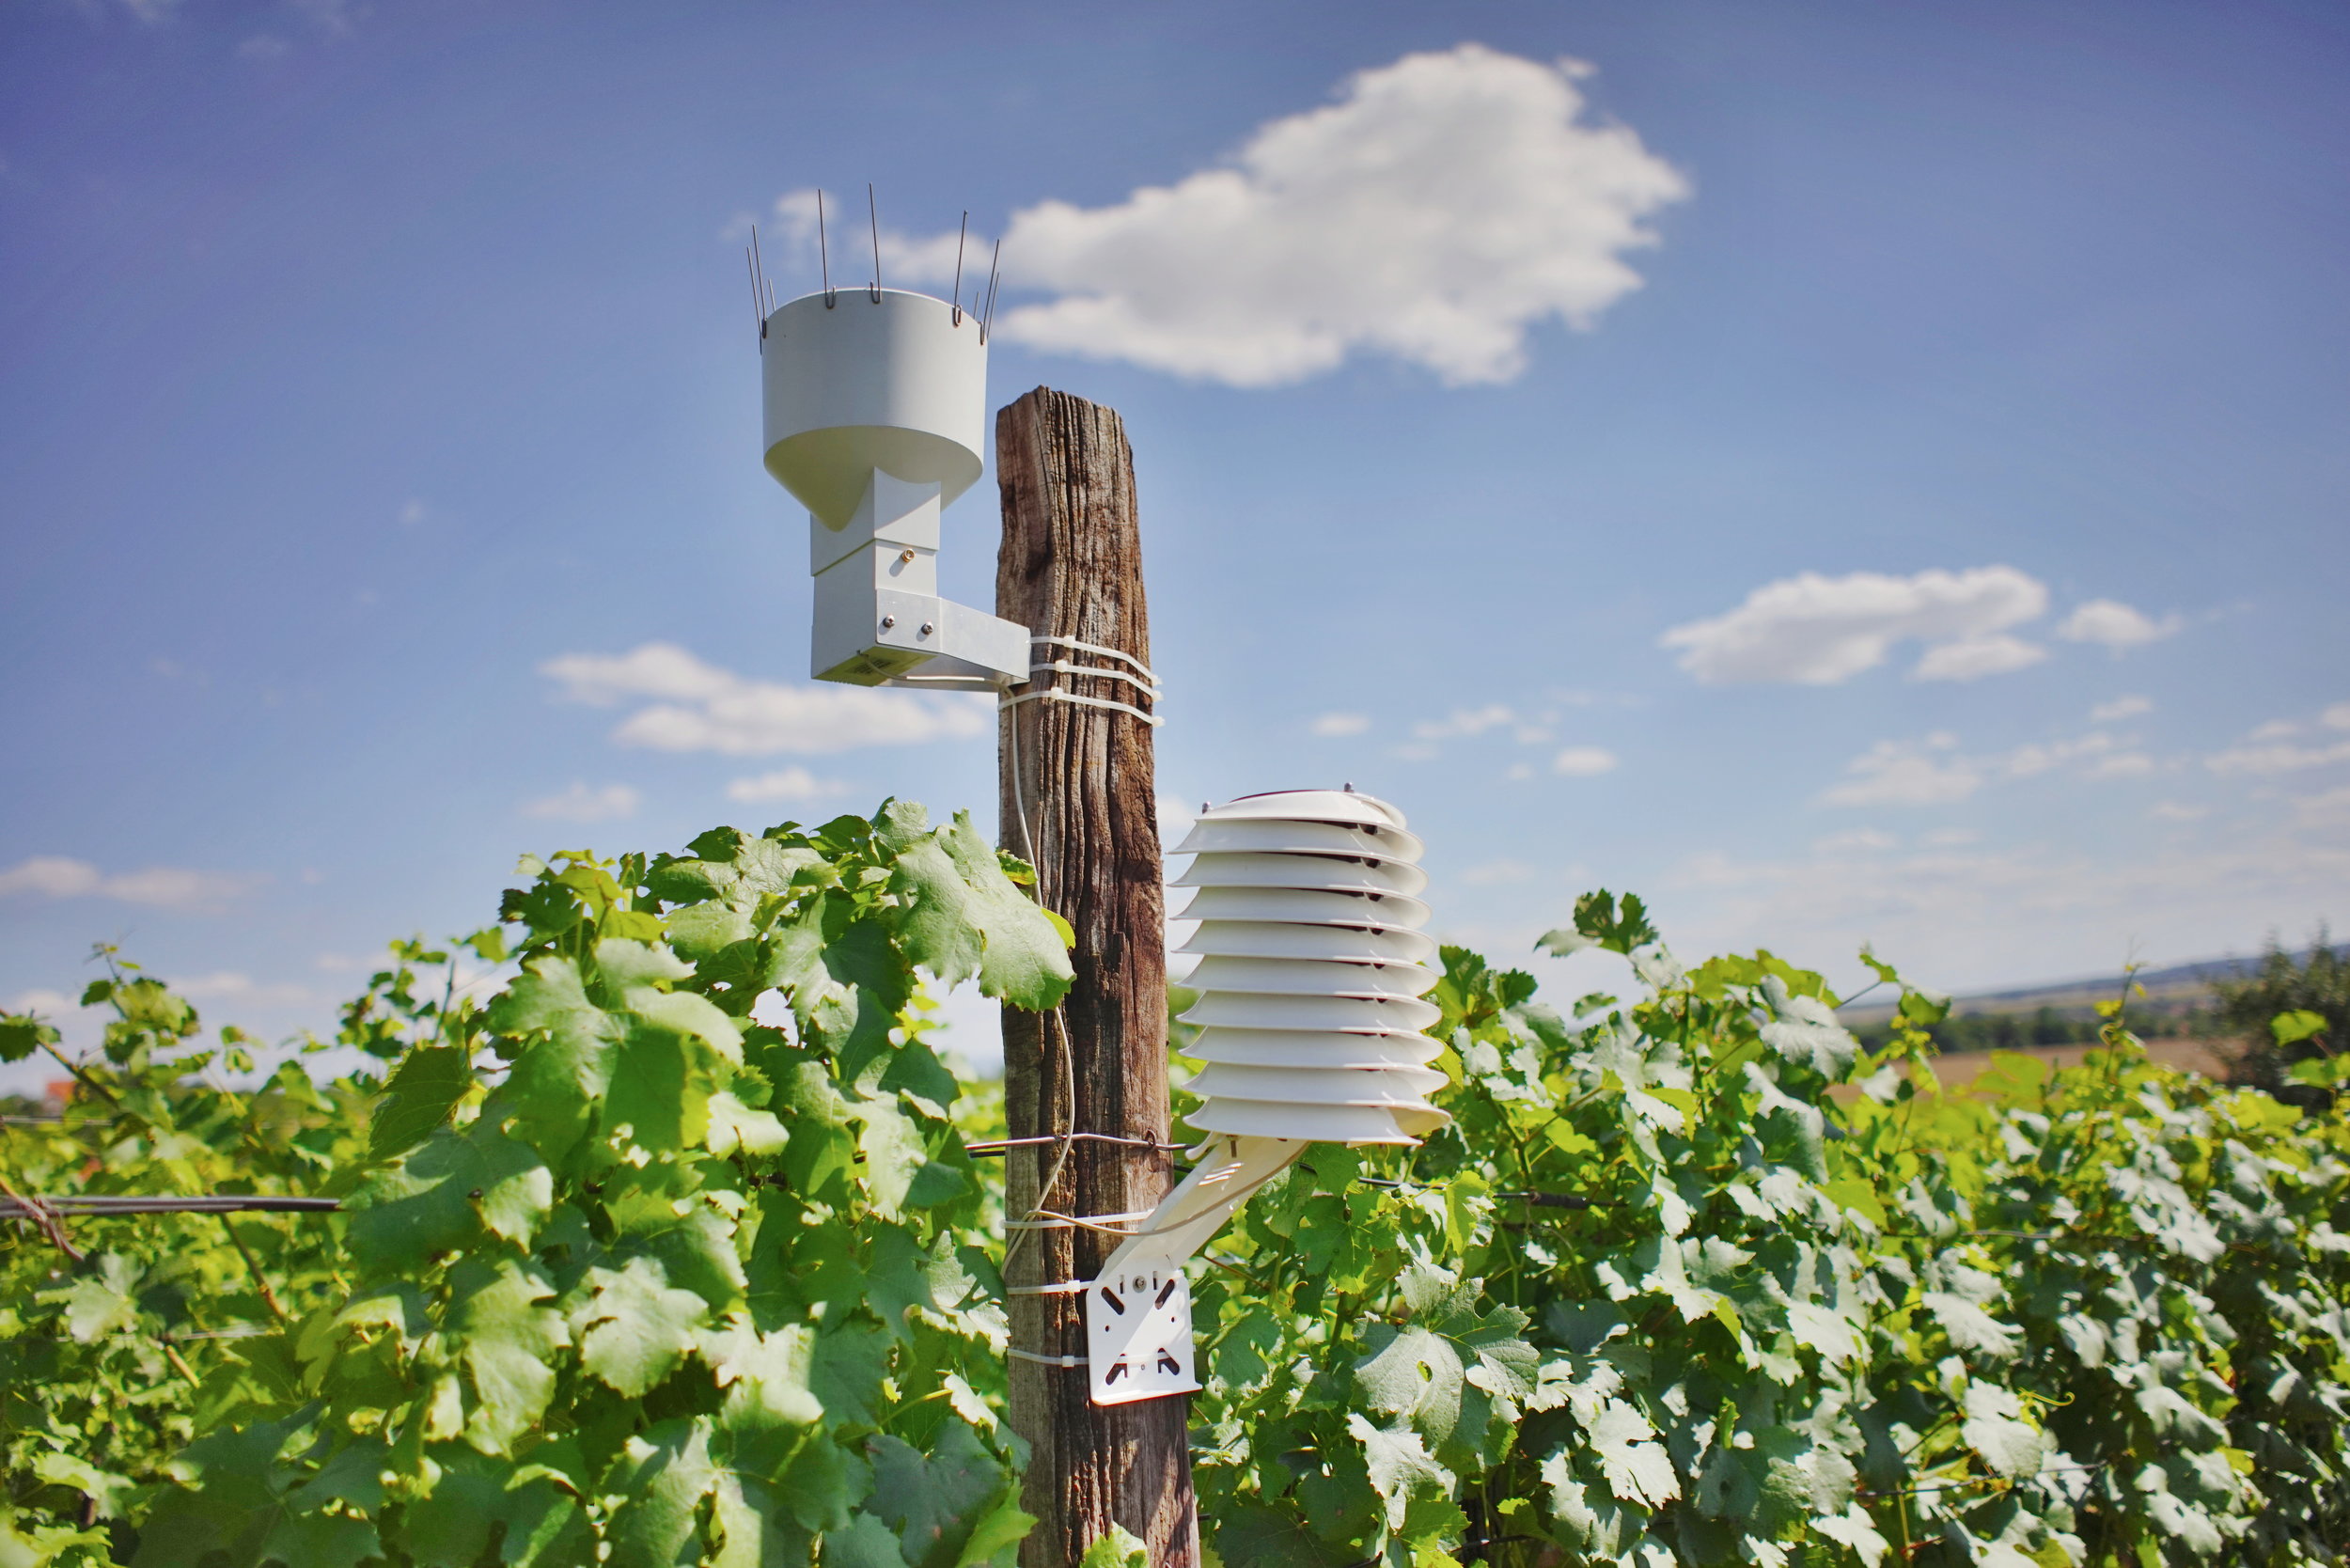 MeteoHelix IoT Pro weather station and rain gauge at a wine yard